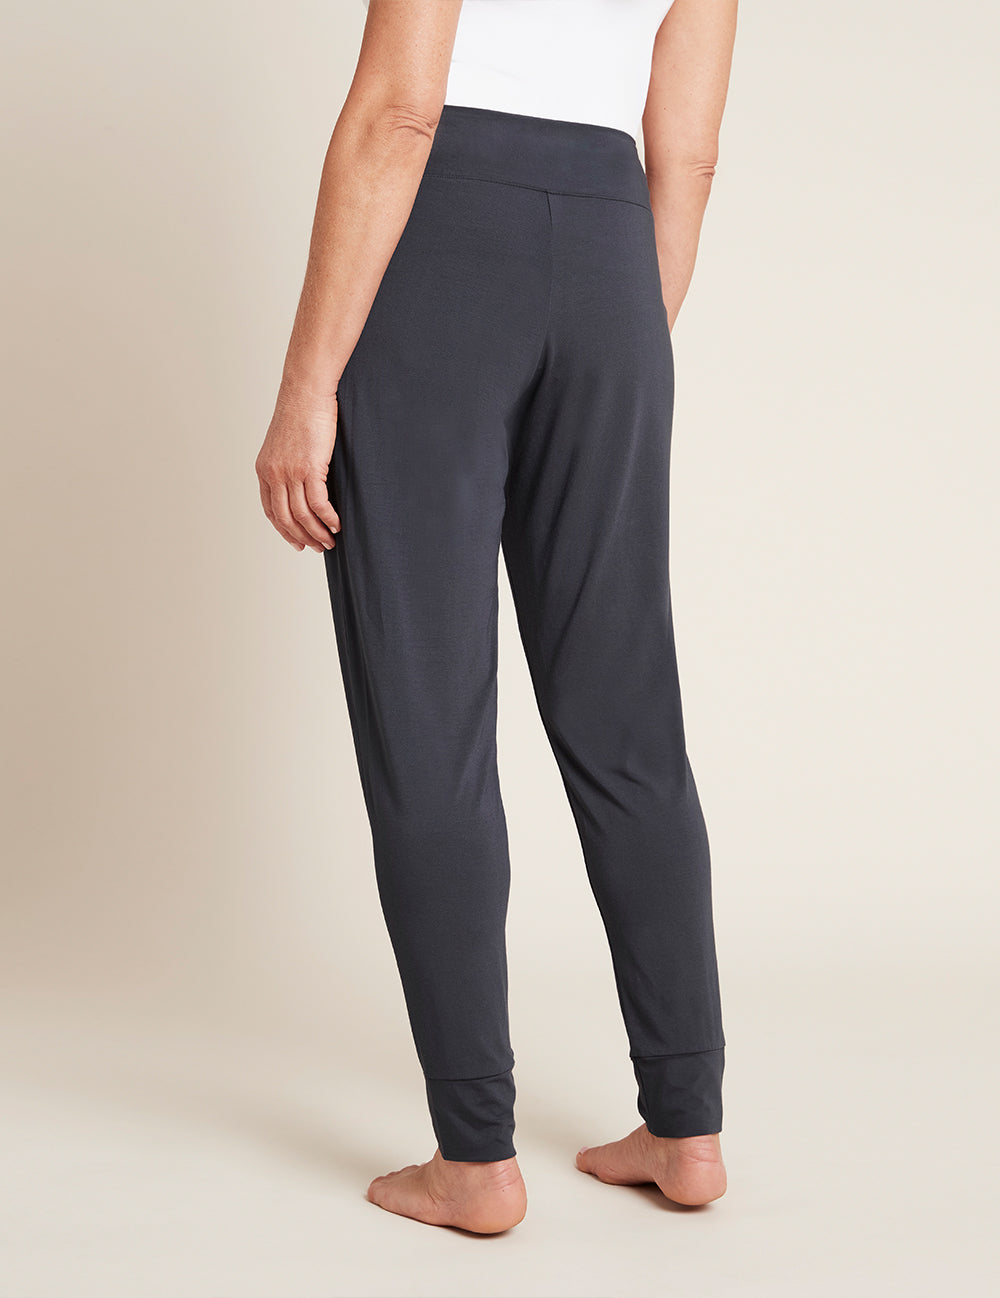 Boody - Our Downtime Lounge Top and Pants give Sunday best a whole new  comfier meaning. #StayHome and #FindYourDowntime 💕⁠ Shop now -->  boody.me/boody-lounge-is-back